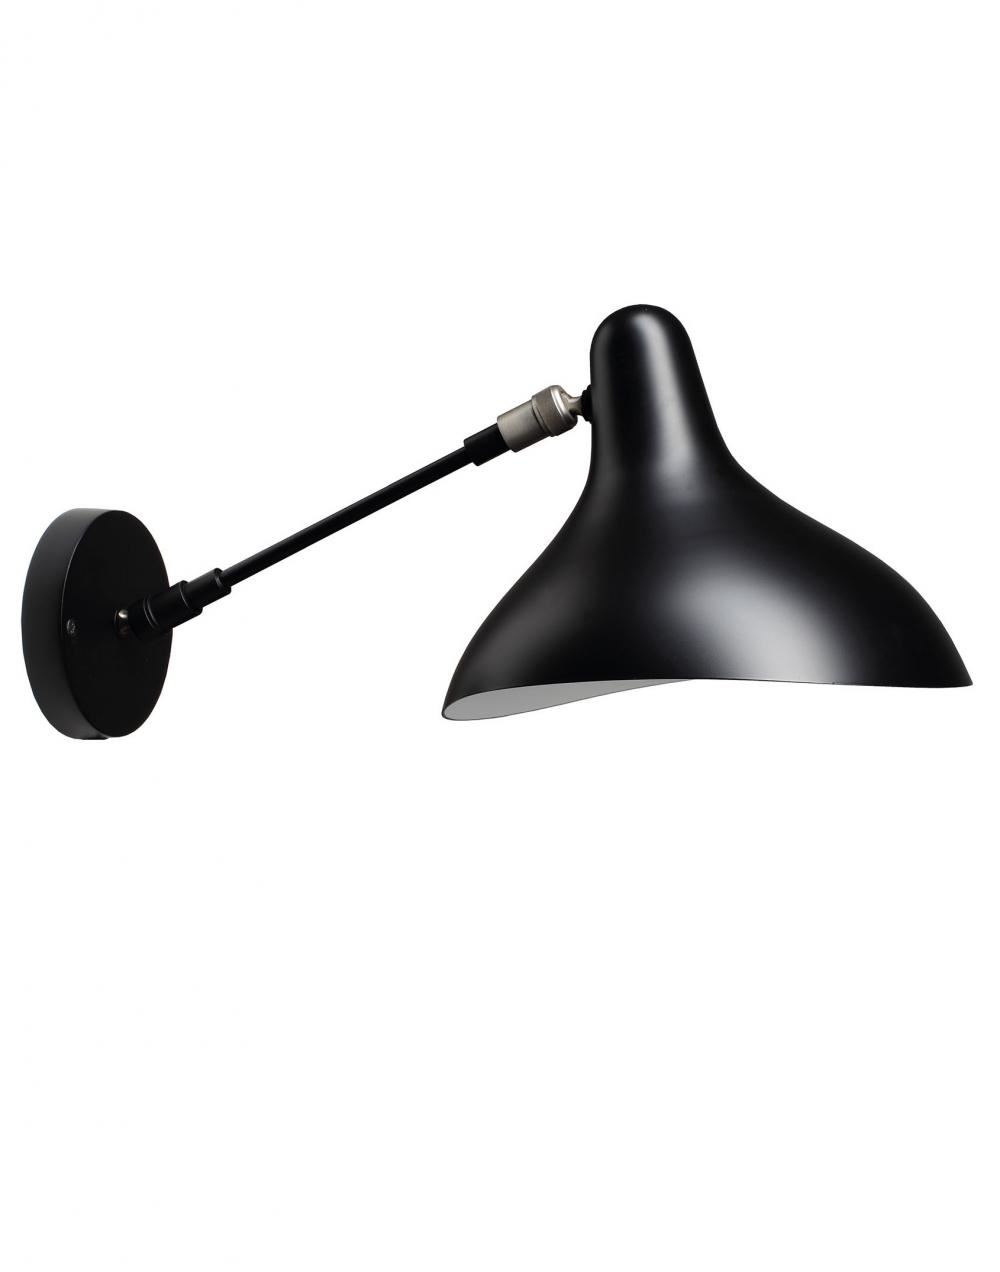 Mantis Bs5 Wall Light Black Satin Standard Without Switch